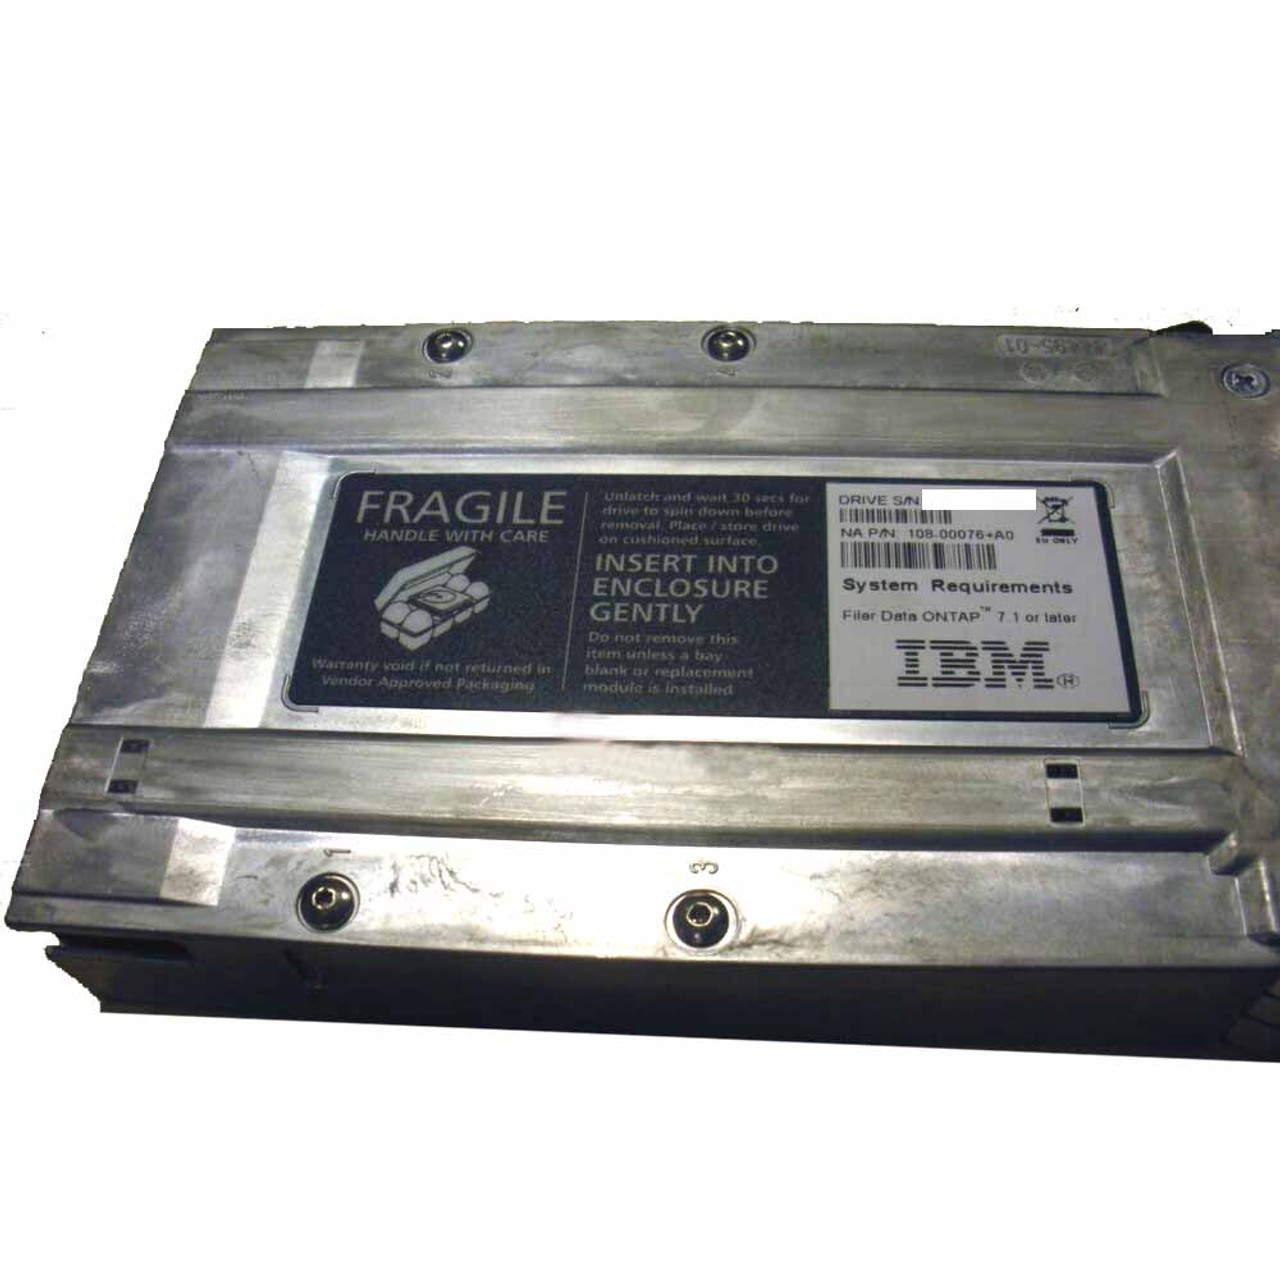 IBM 146.8GB 15K Drive Module for DS4000